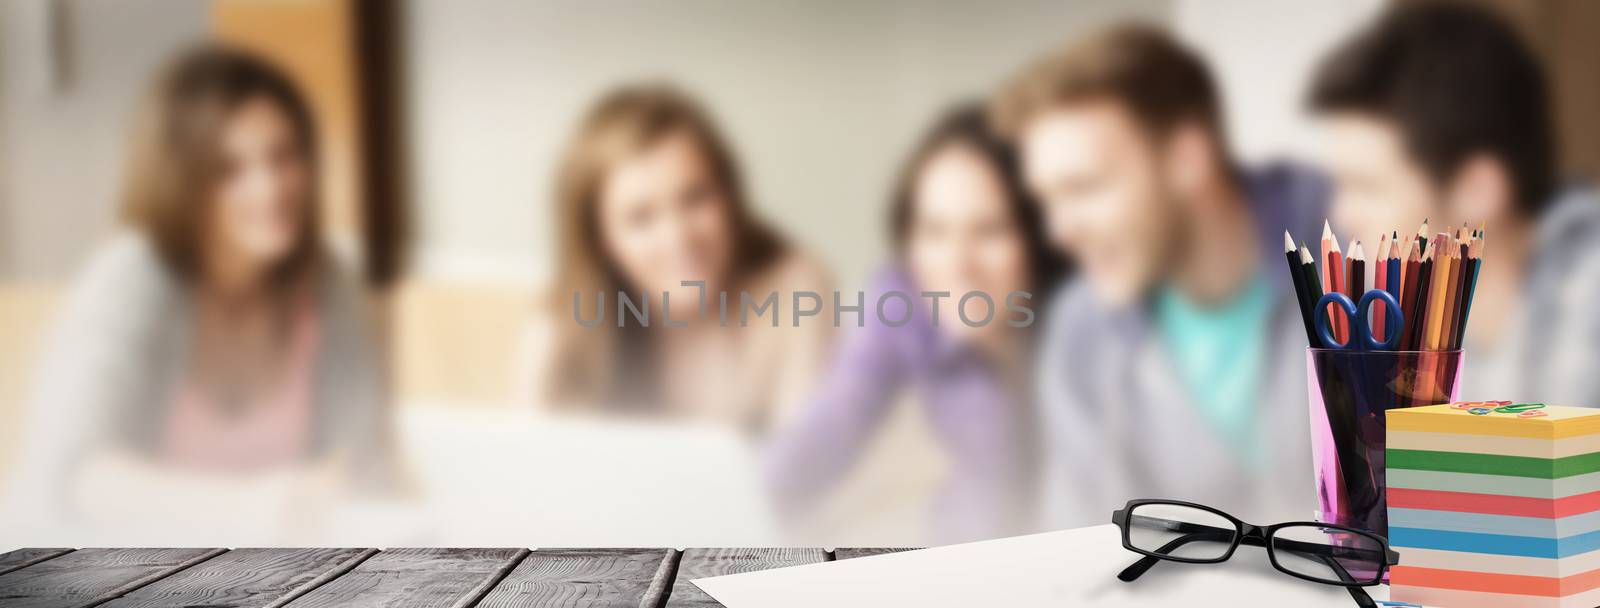 School supplies on desk against smiling friends students using laptop